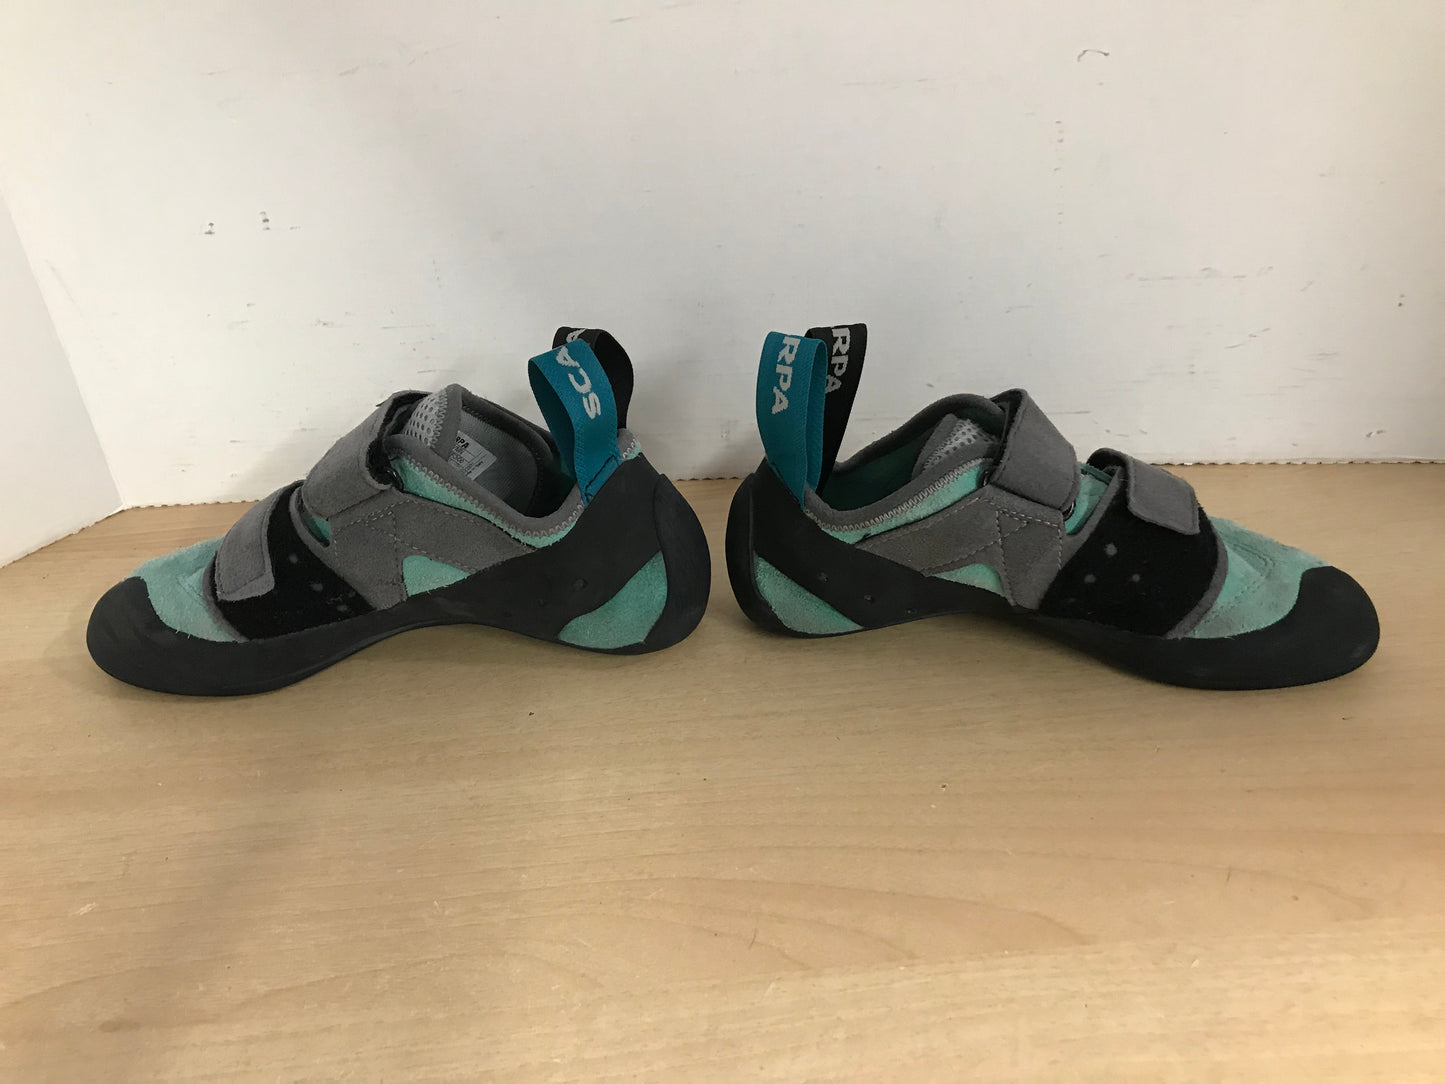 Rock Climbing Shoes Child Size 6 Youth Scarpa Origin Grey Teal Retail 125.00 Fantastic Quality  JP 5596